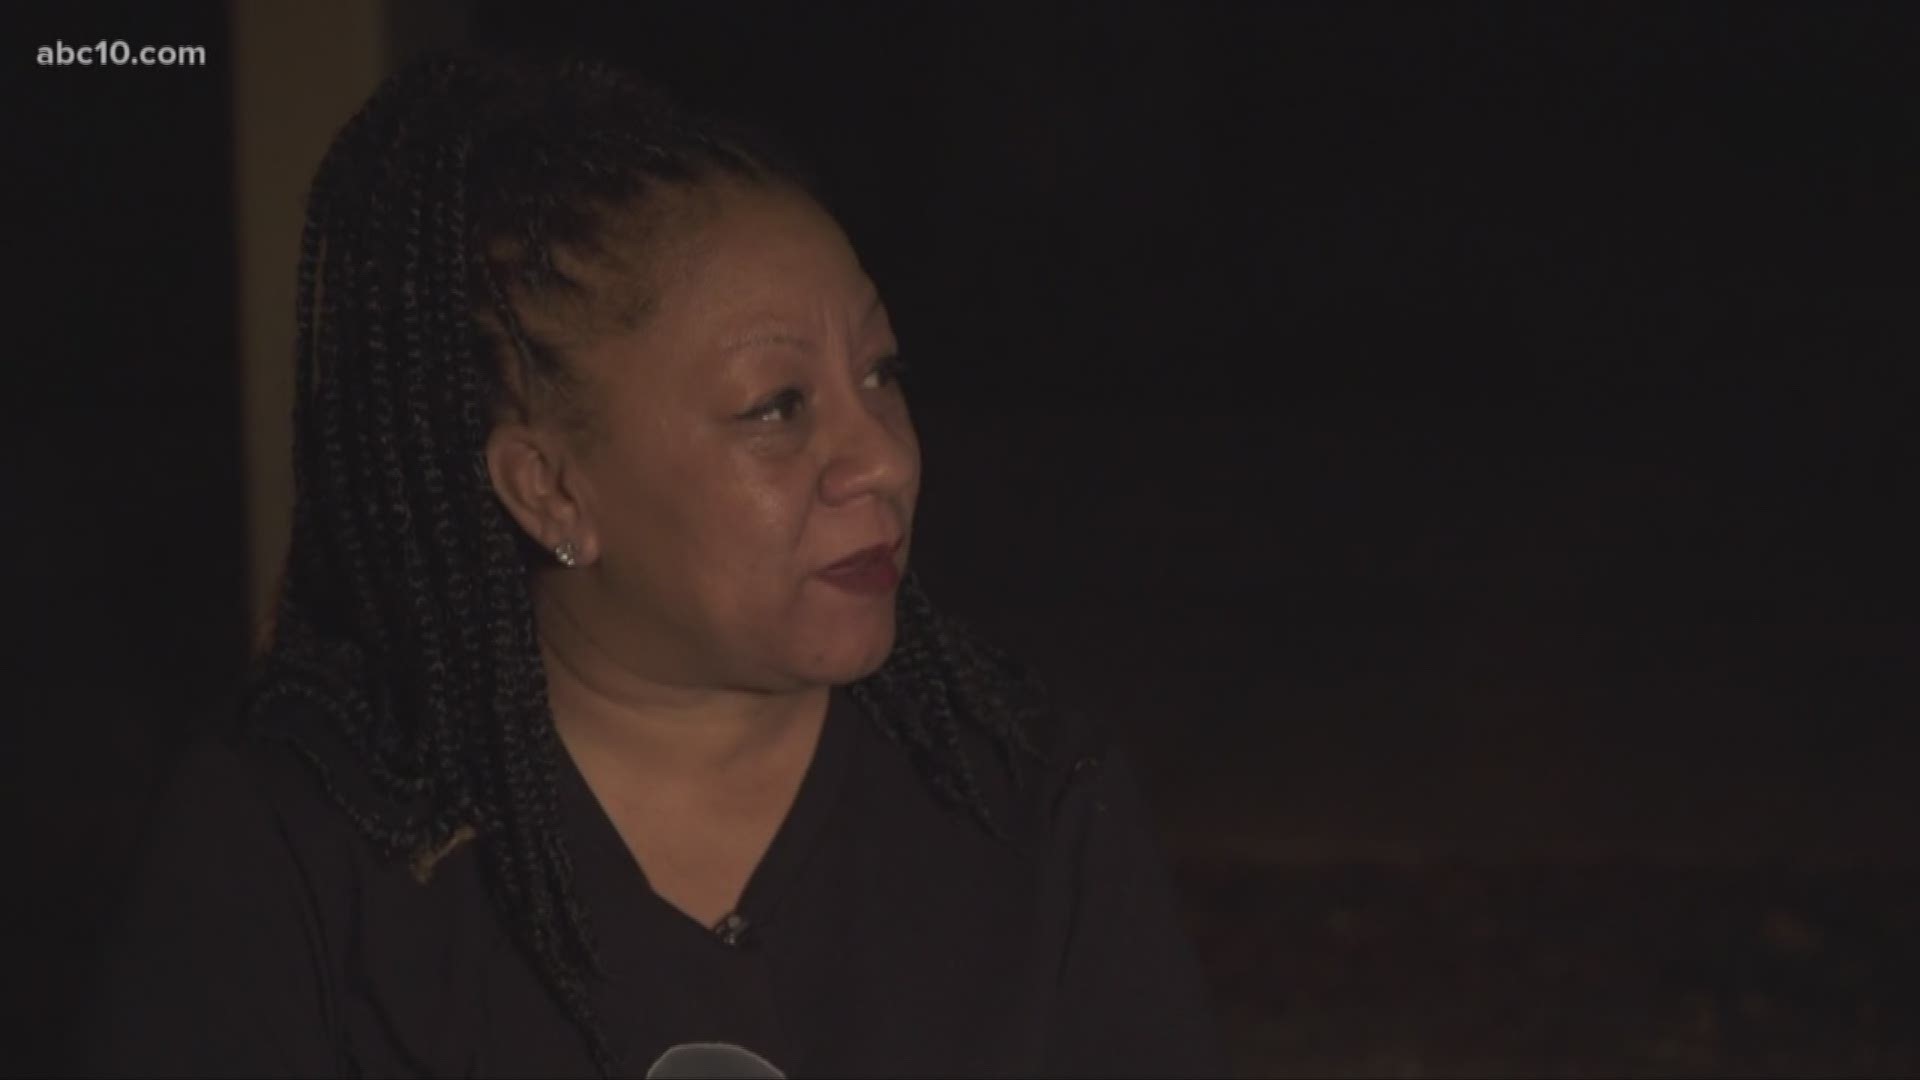 The founder of the Sacramento's Black Lives Matter chapter, Tanya Faison, responded, Thrusday, to Sacramento Police Department's completed investigation into the officer-involved shooting of Stephon Clark.